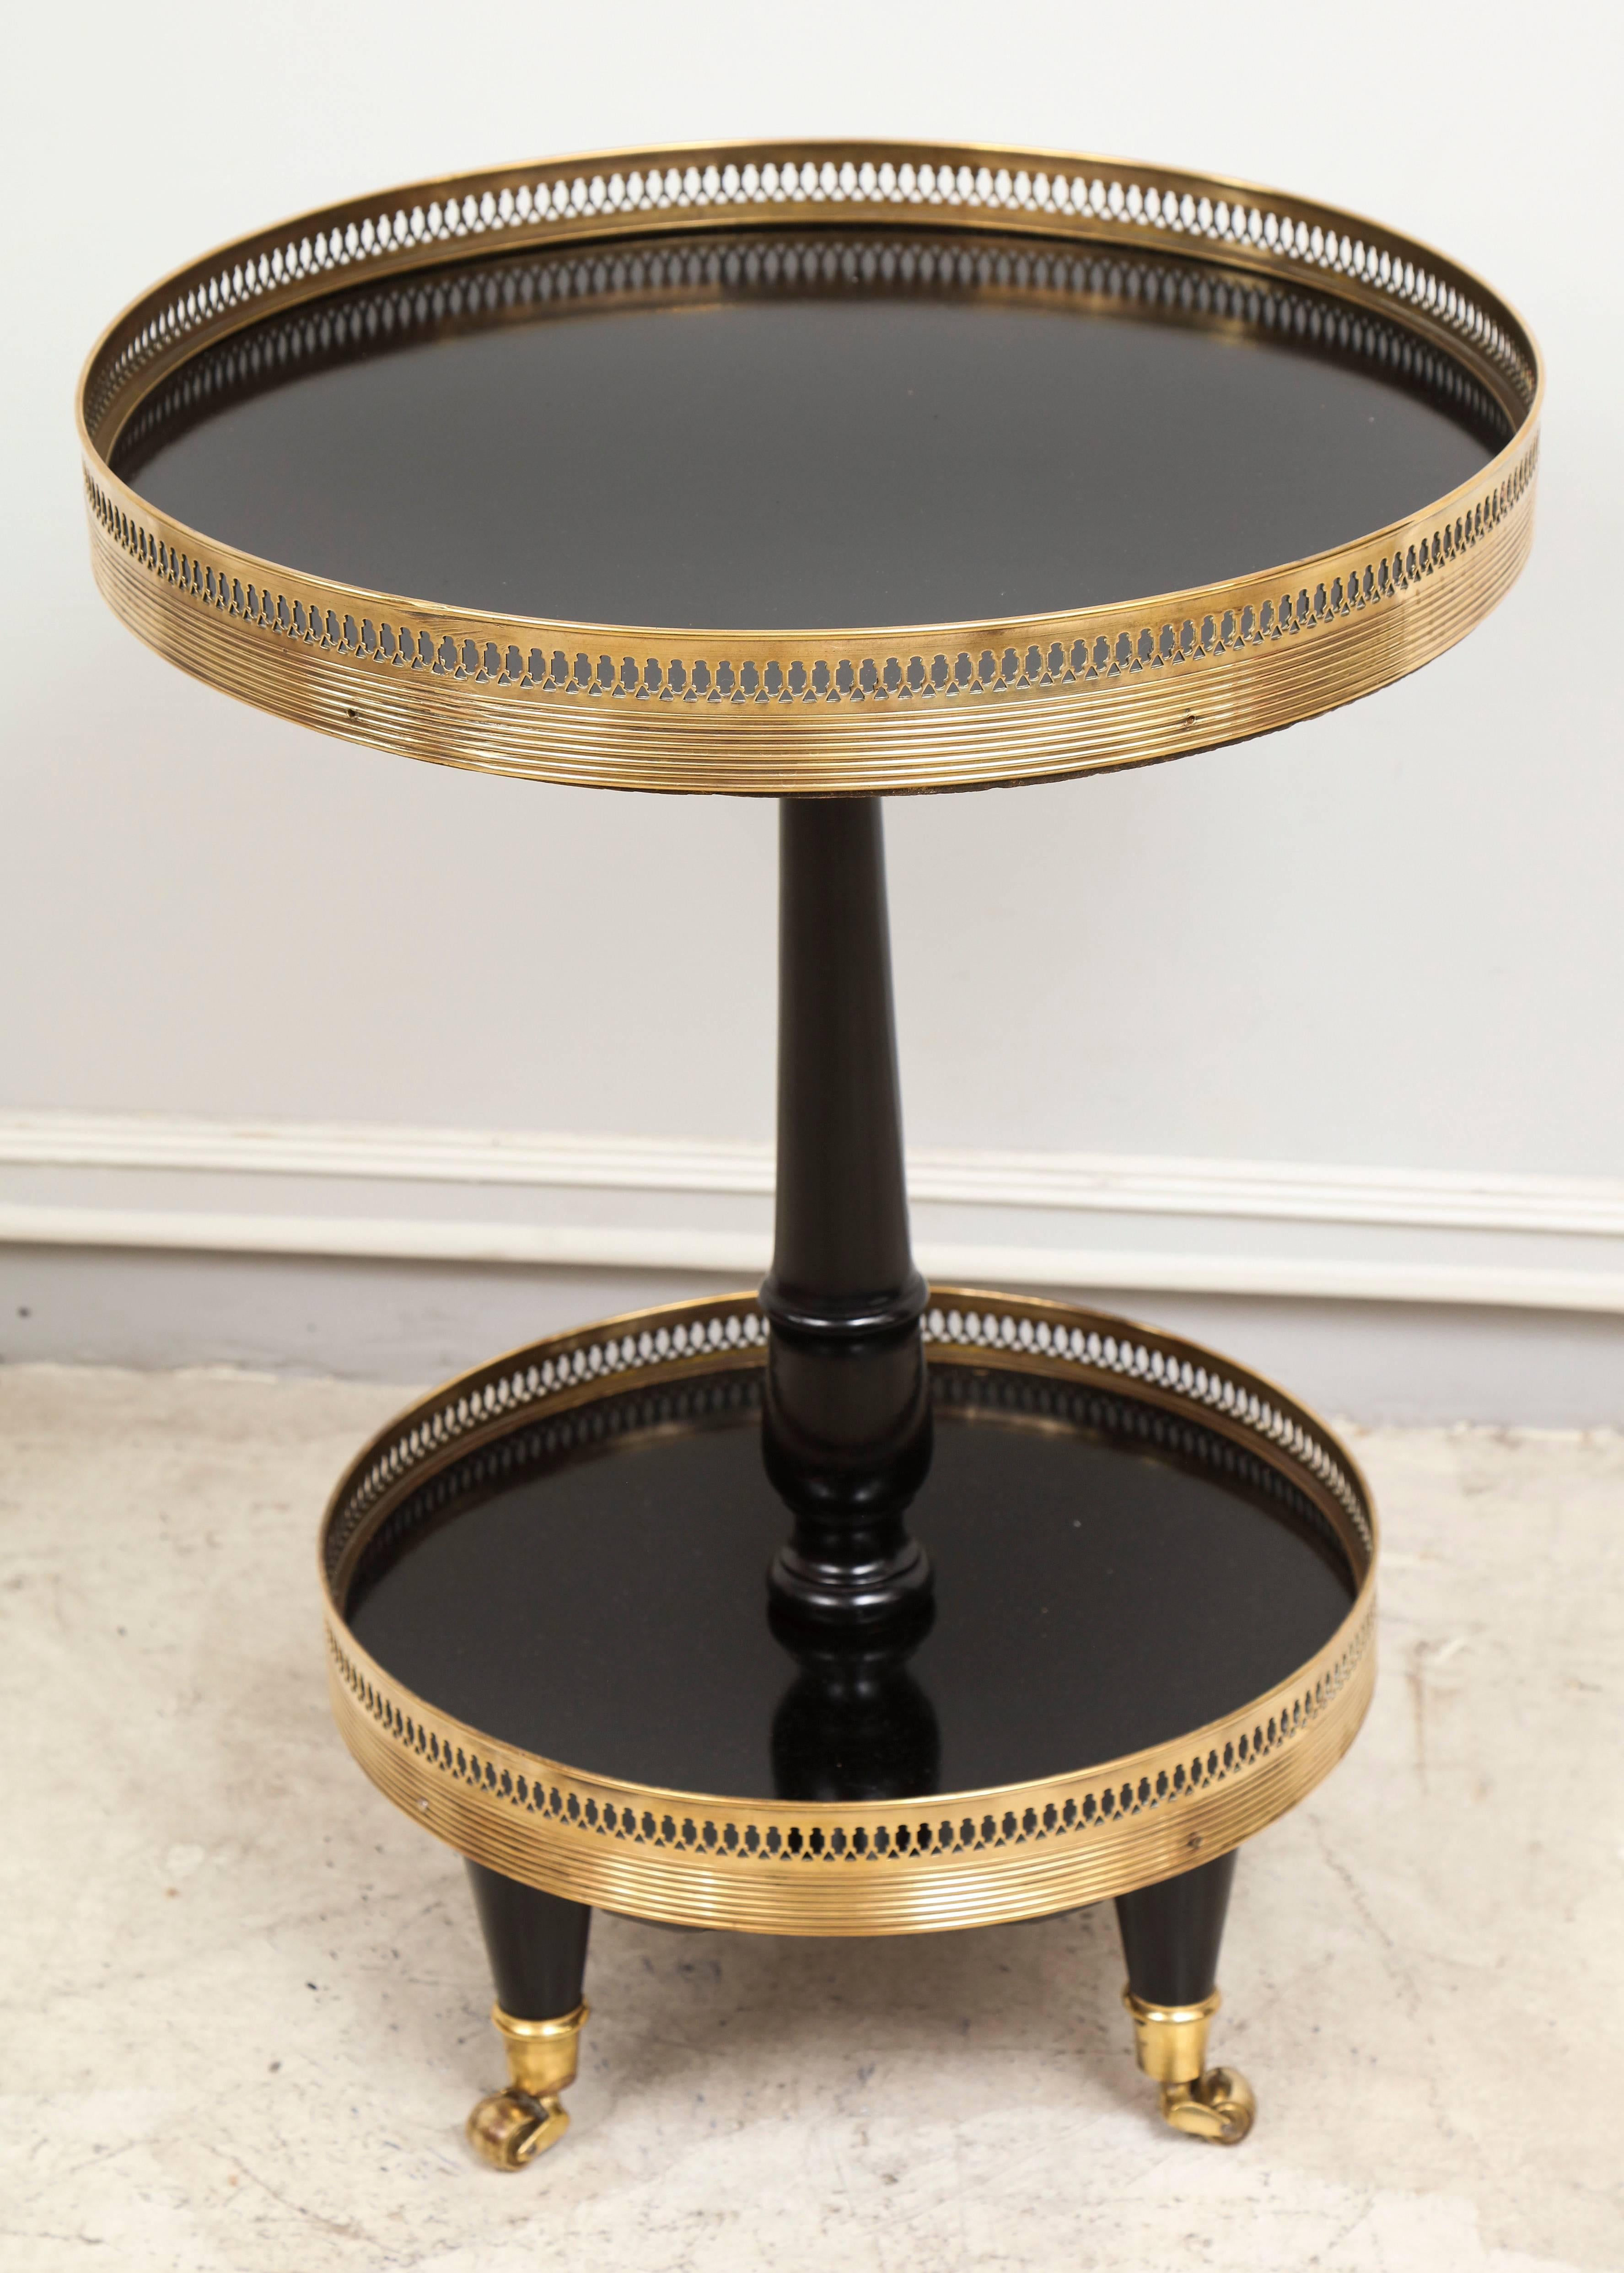 Regency style end table with brass gallery on brass sabots.